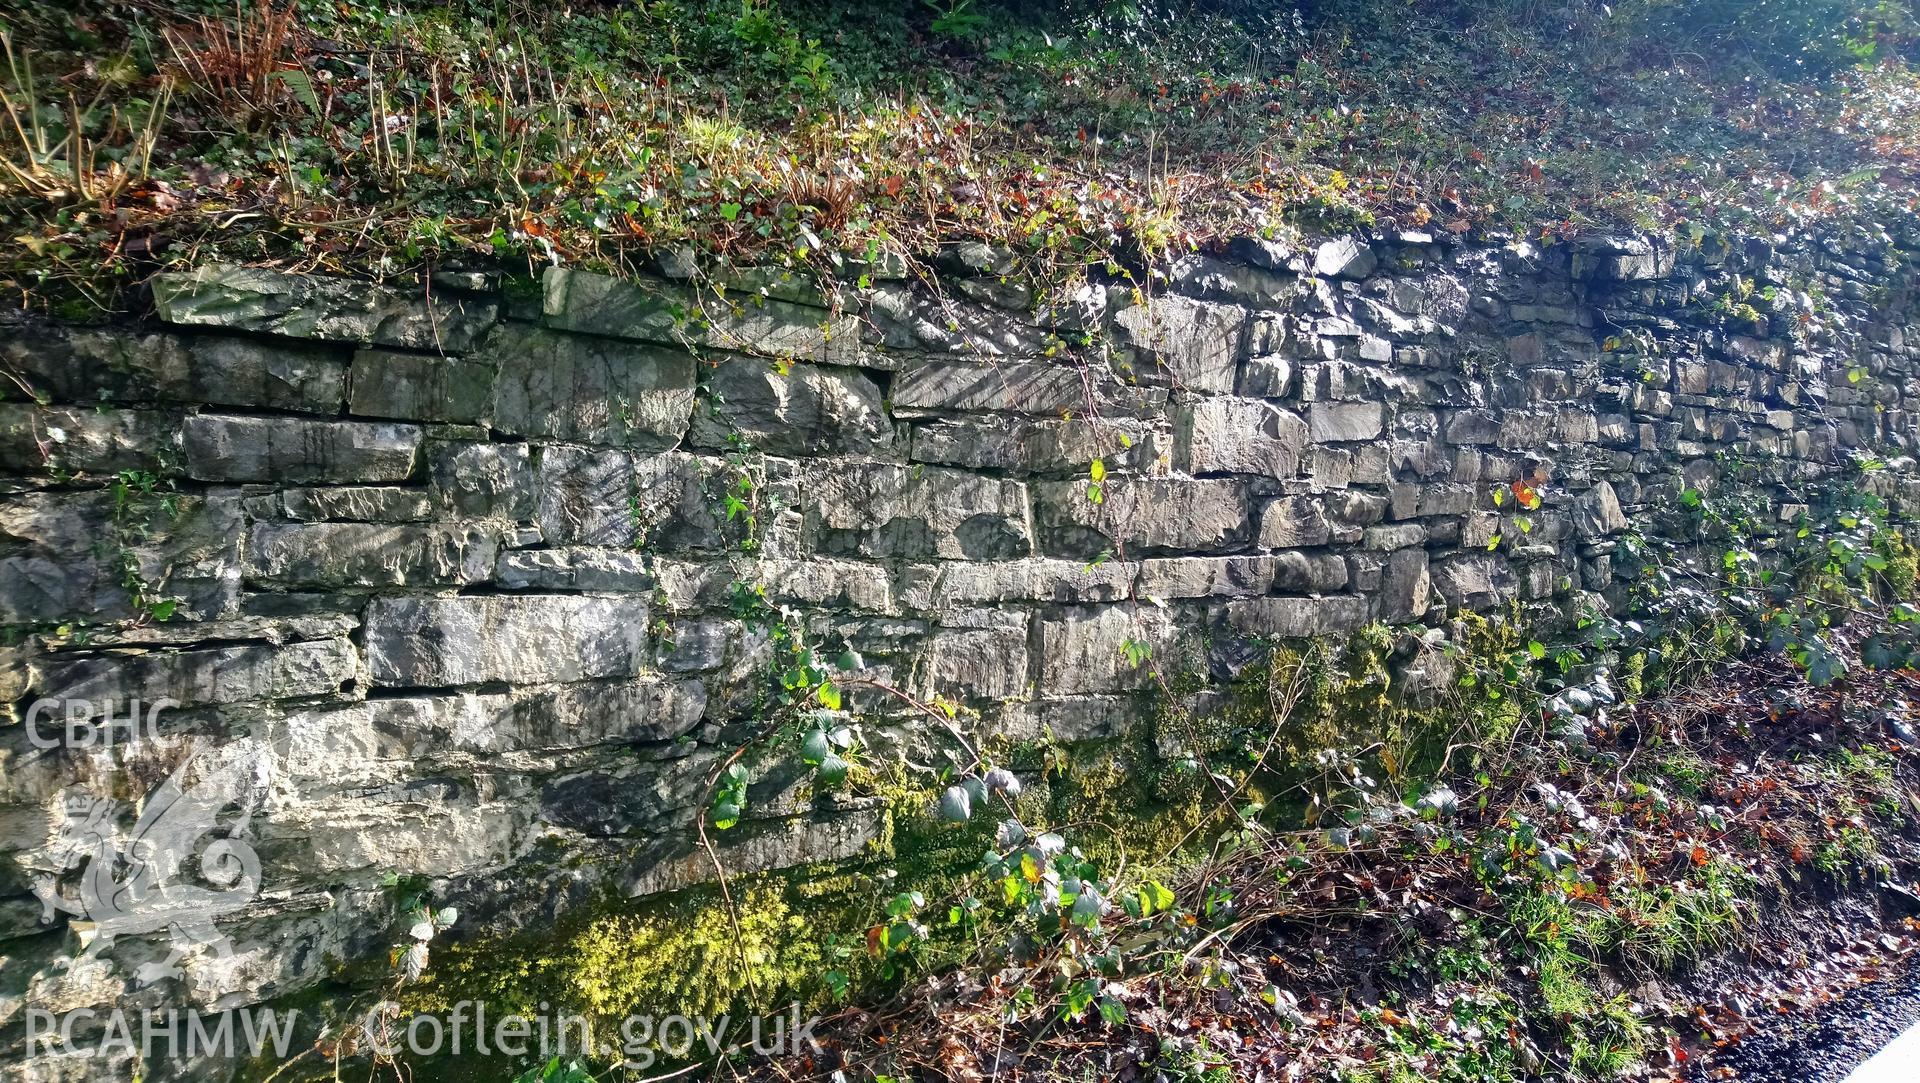 Photographs taken on 15th March 2018 of historic retaining wall at Castle Hill, Llanilar, built of local sandstone blocks closely replicating the appearance of the original Roman walls of the Abermagwr Roman villa which were built of the same stone.